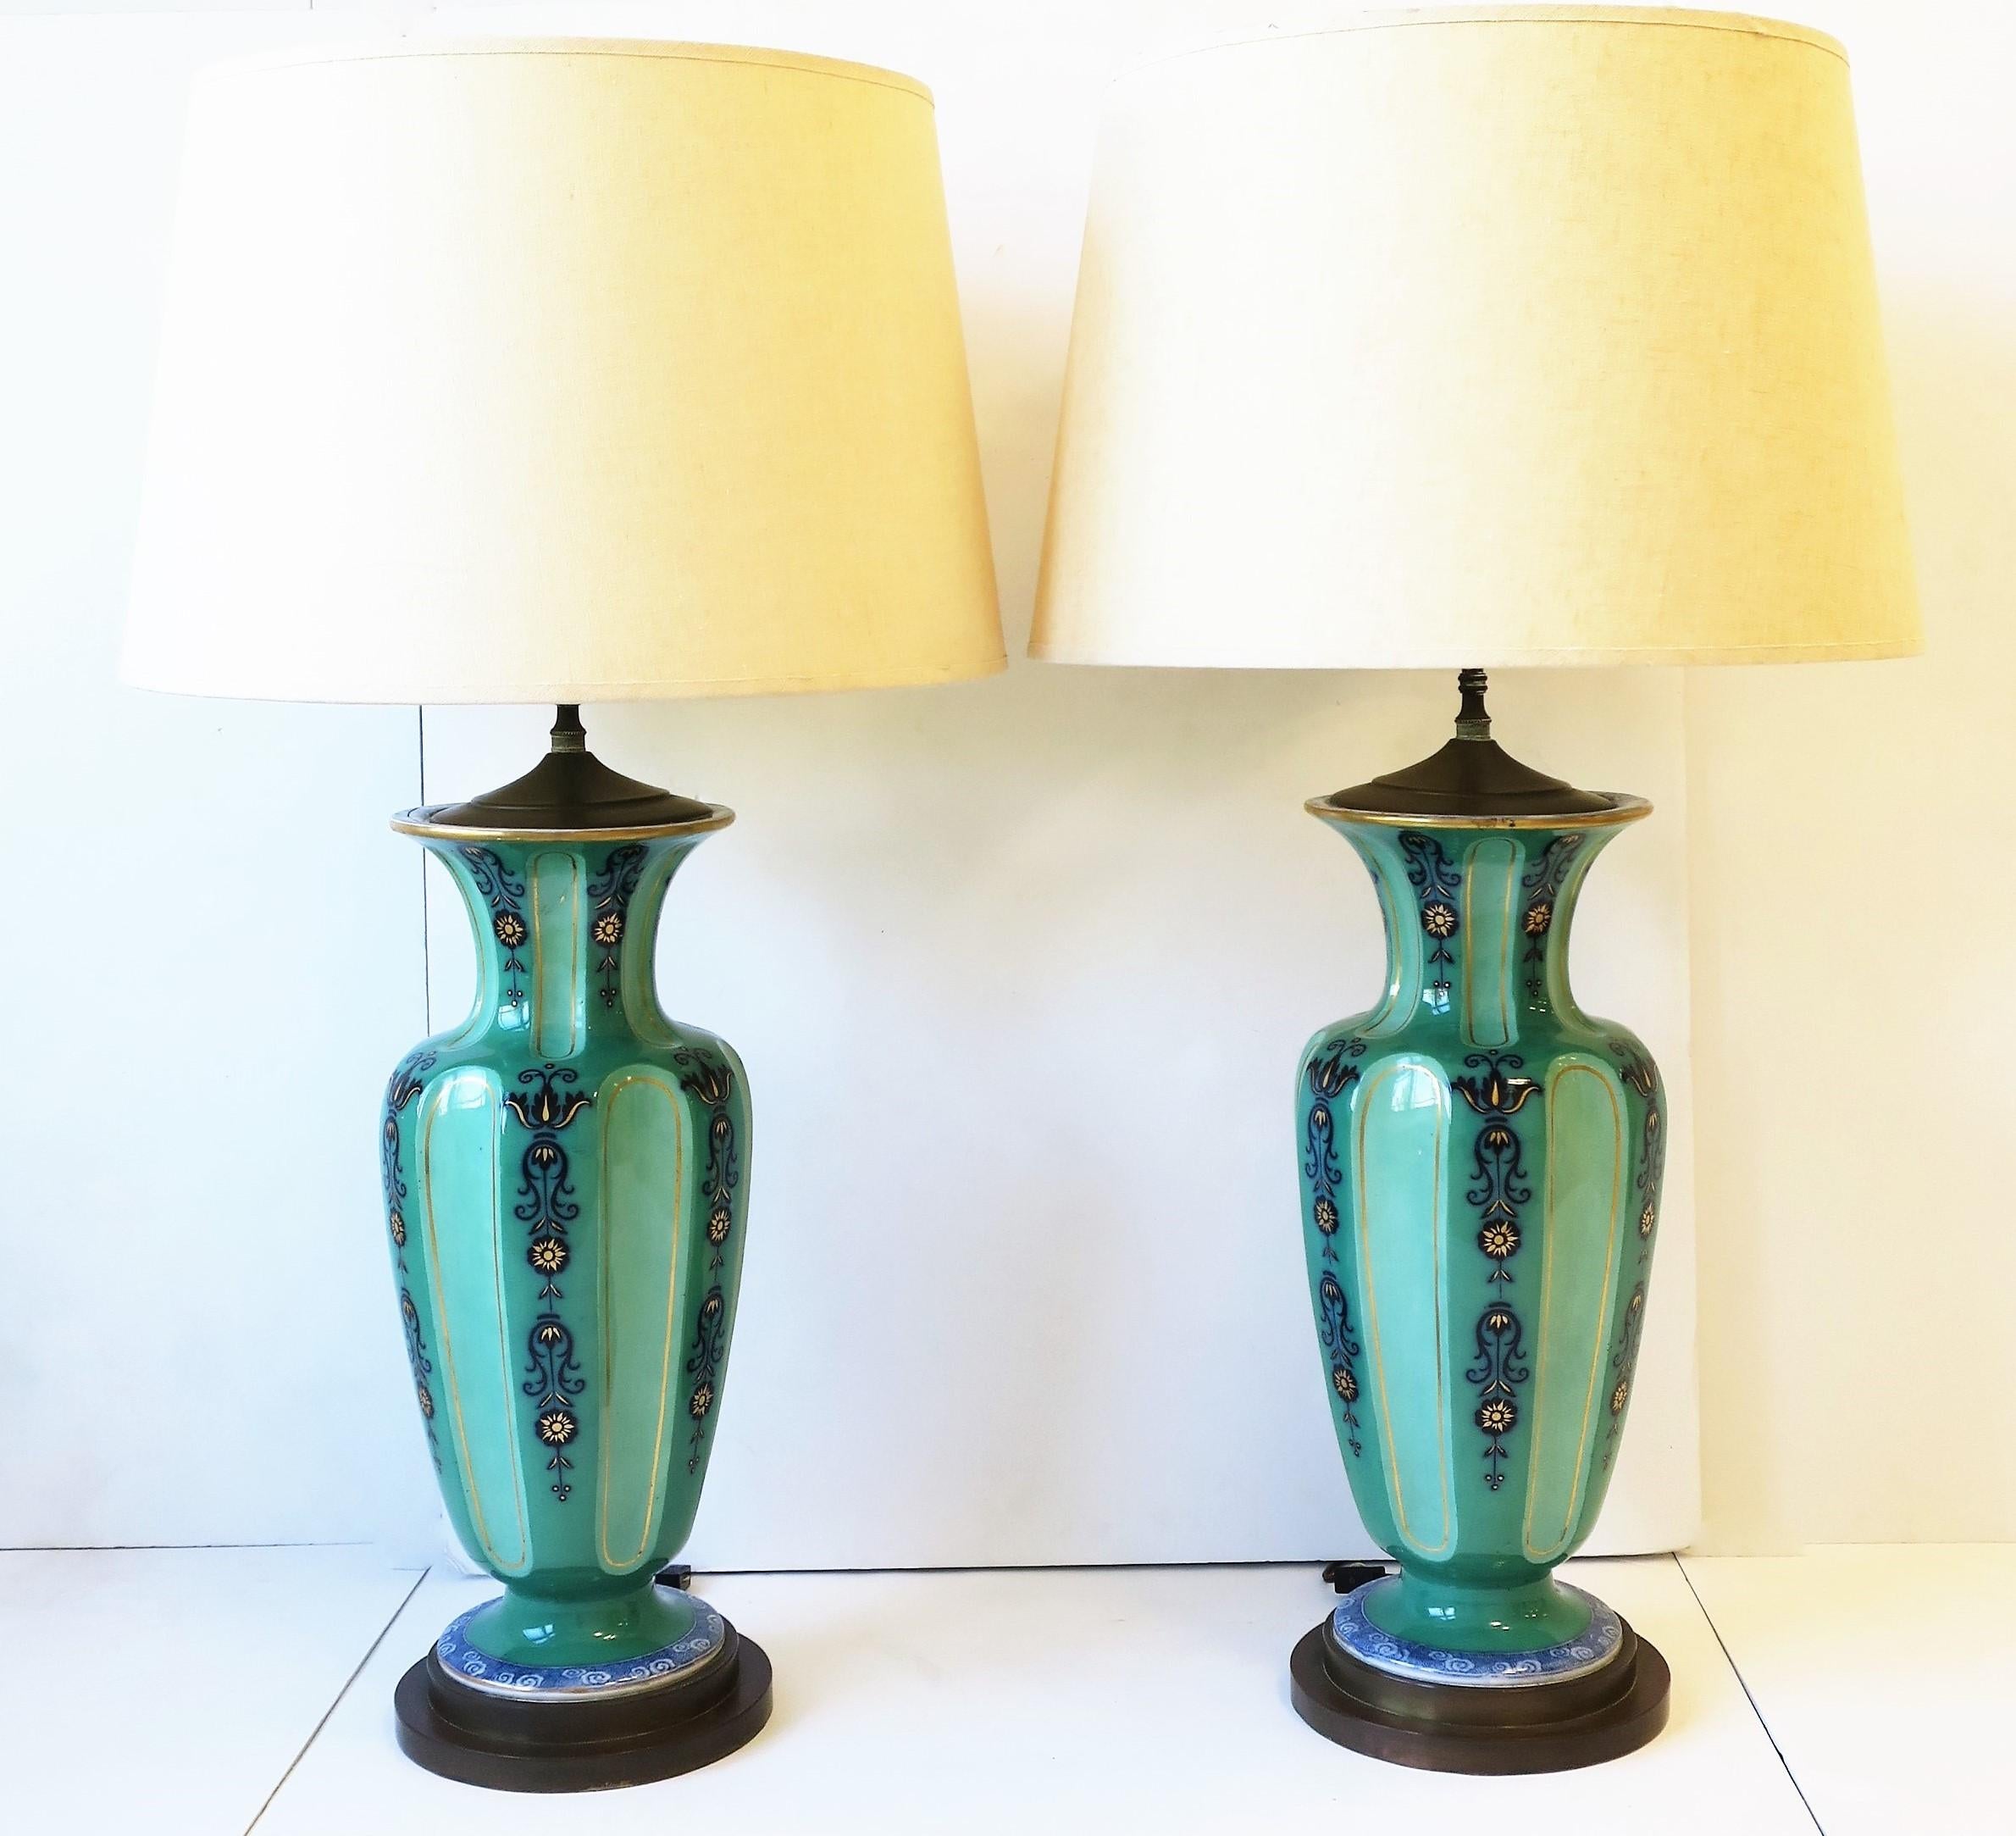 A very beautiful pair of large, tall, Dutch porcelain table lamps with brass hardware, circa early-20th century, 1930s, Holland. Colors include Emerald green, light-green, Sapphire blue, blue, white, and touches of gold. Brass hardware is with